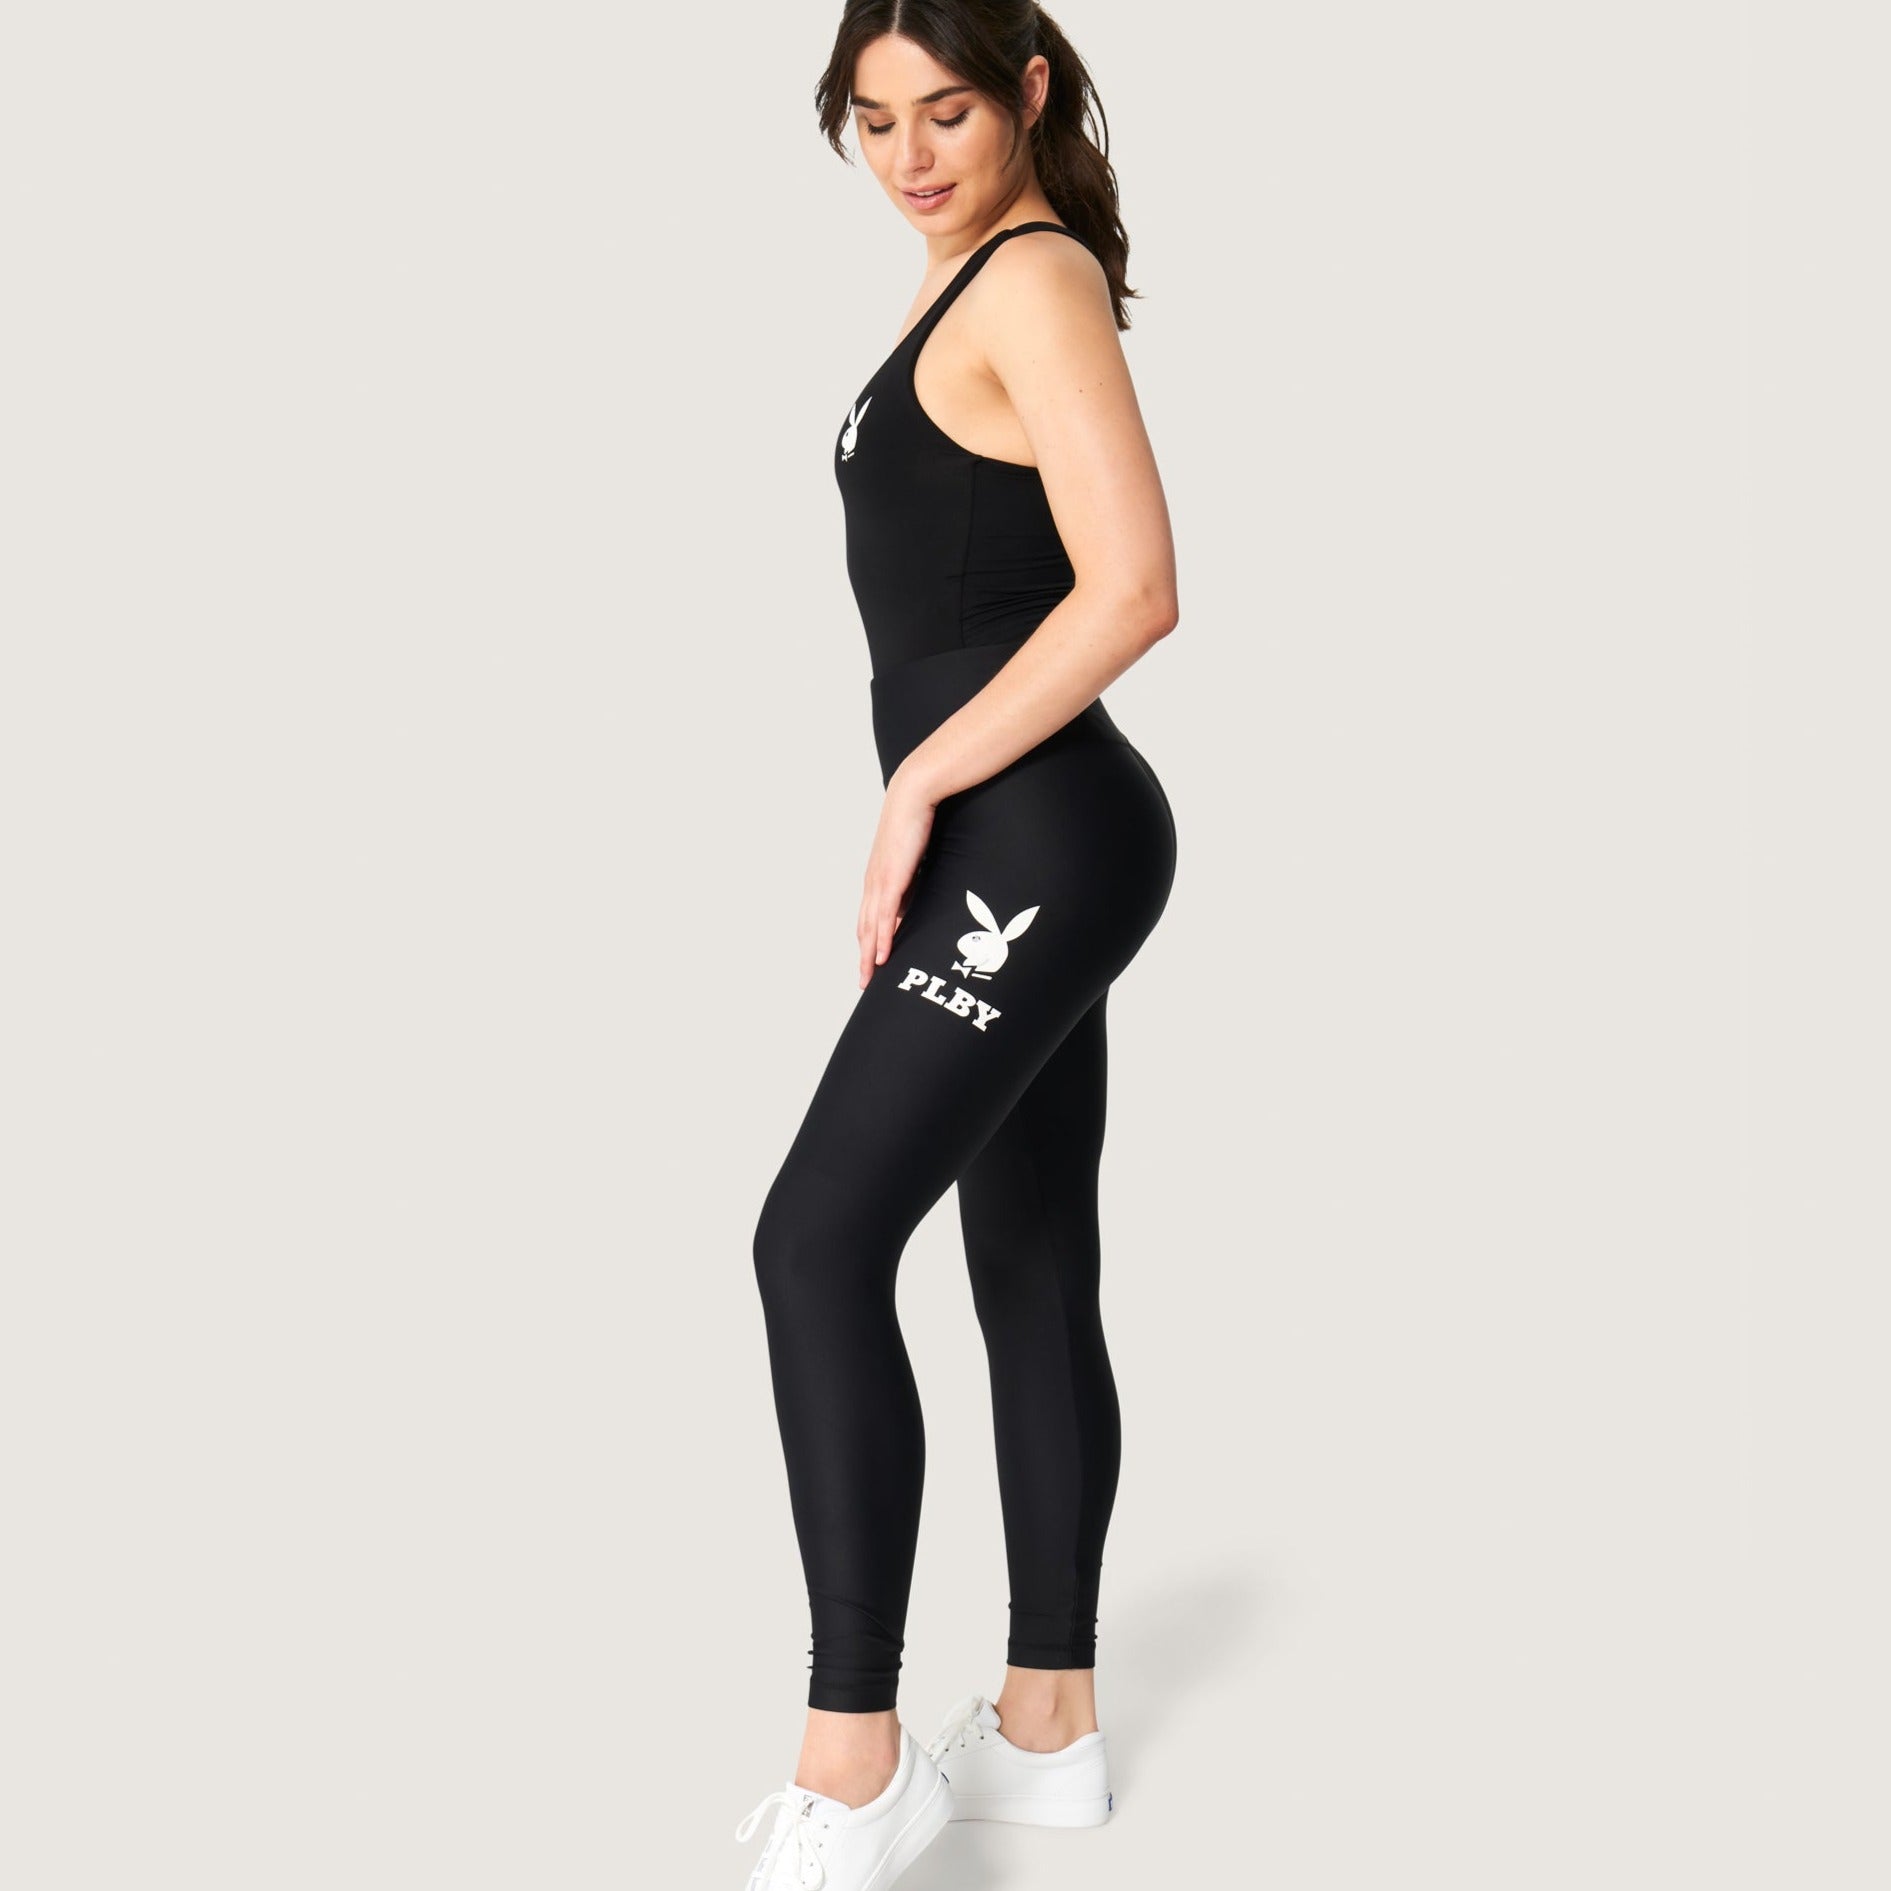 eastern cottontail  How to wear leggings, Fashion tights, Black